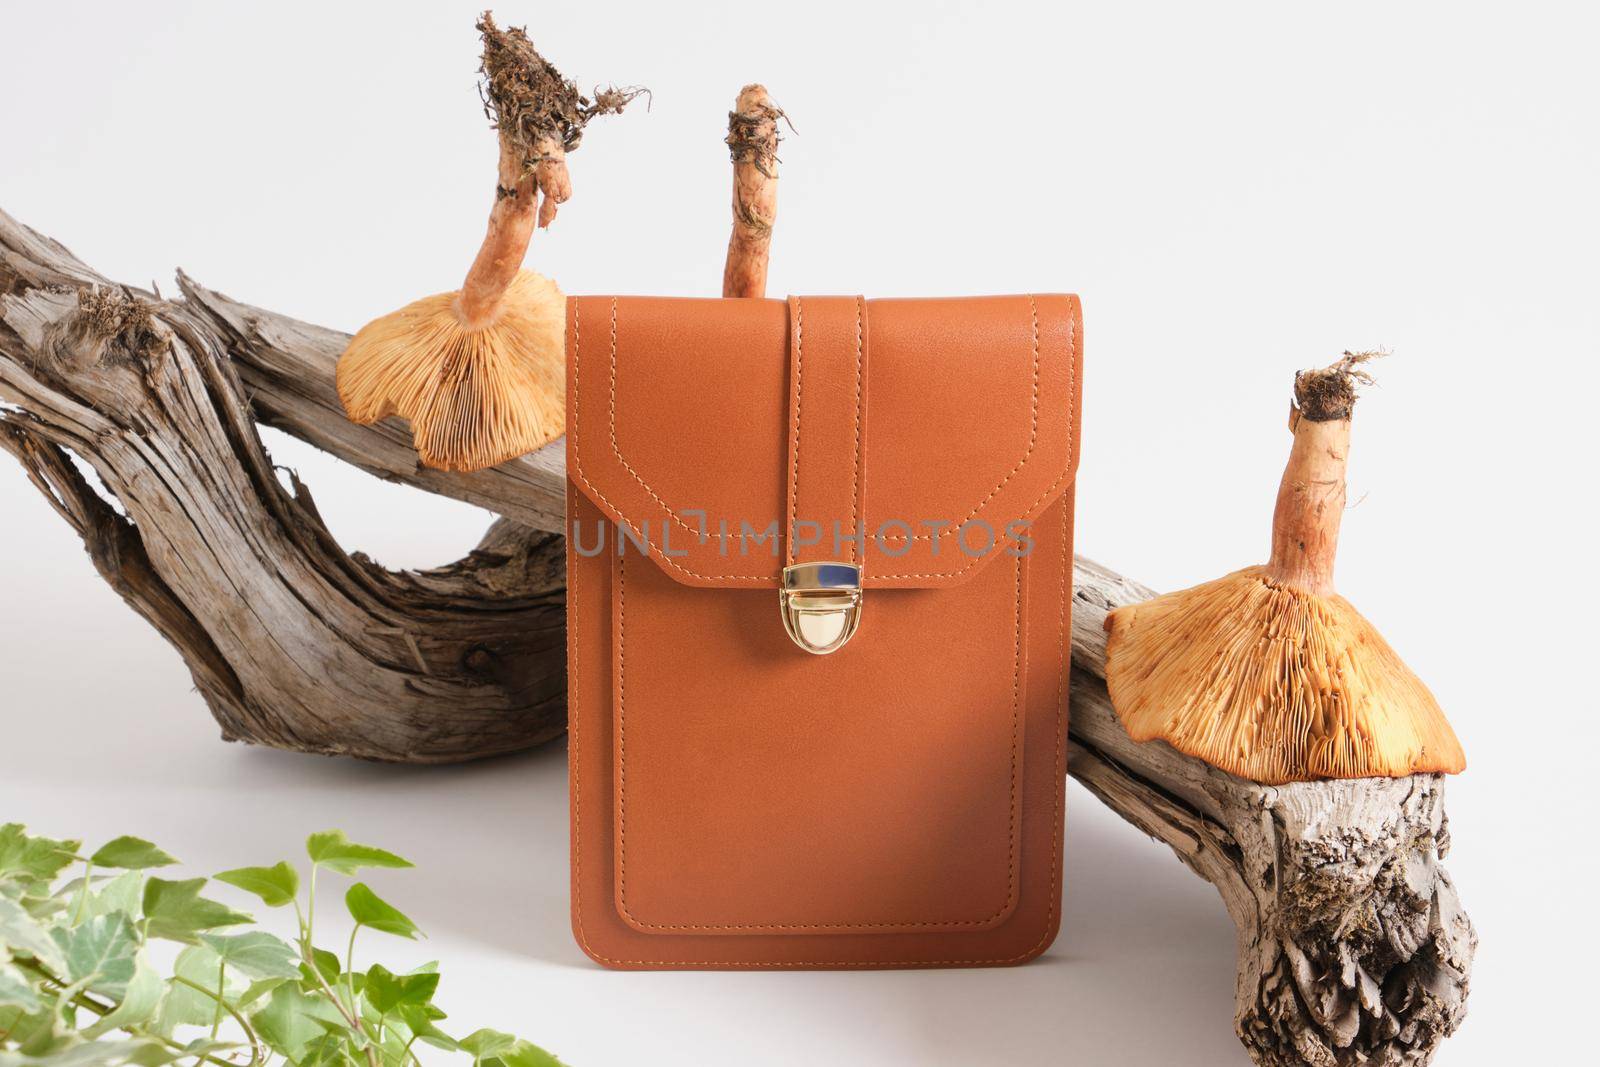 brown bag made of eco leather, driftwood and toadstools mushrooms on a gray background, genuine leather from mushroom mycelium concept, no killing animals for the sake of fashion